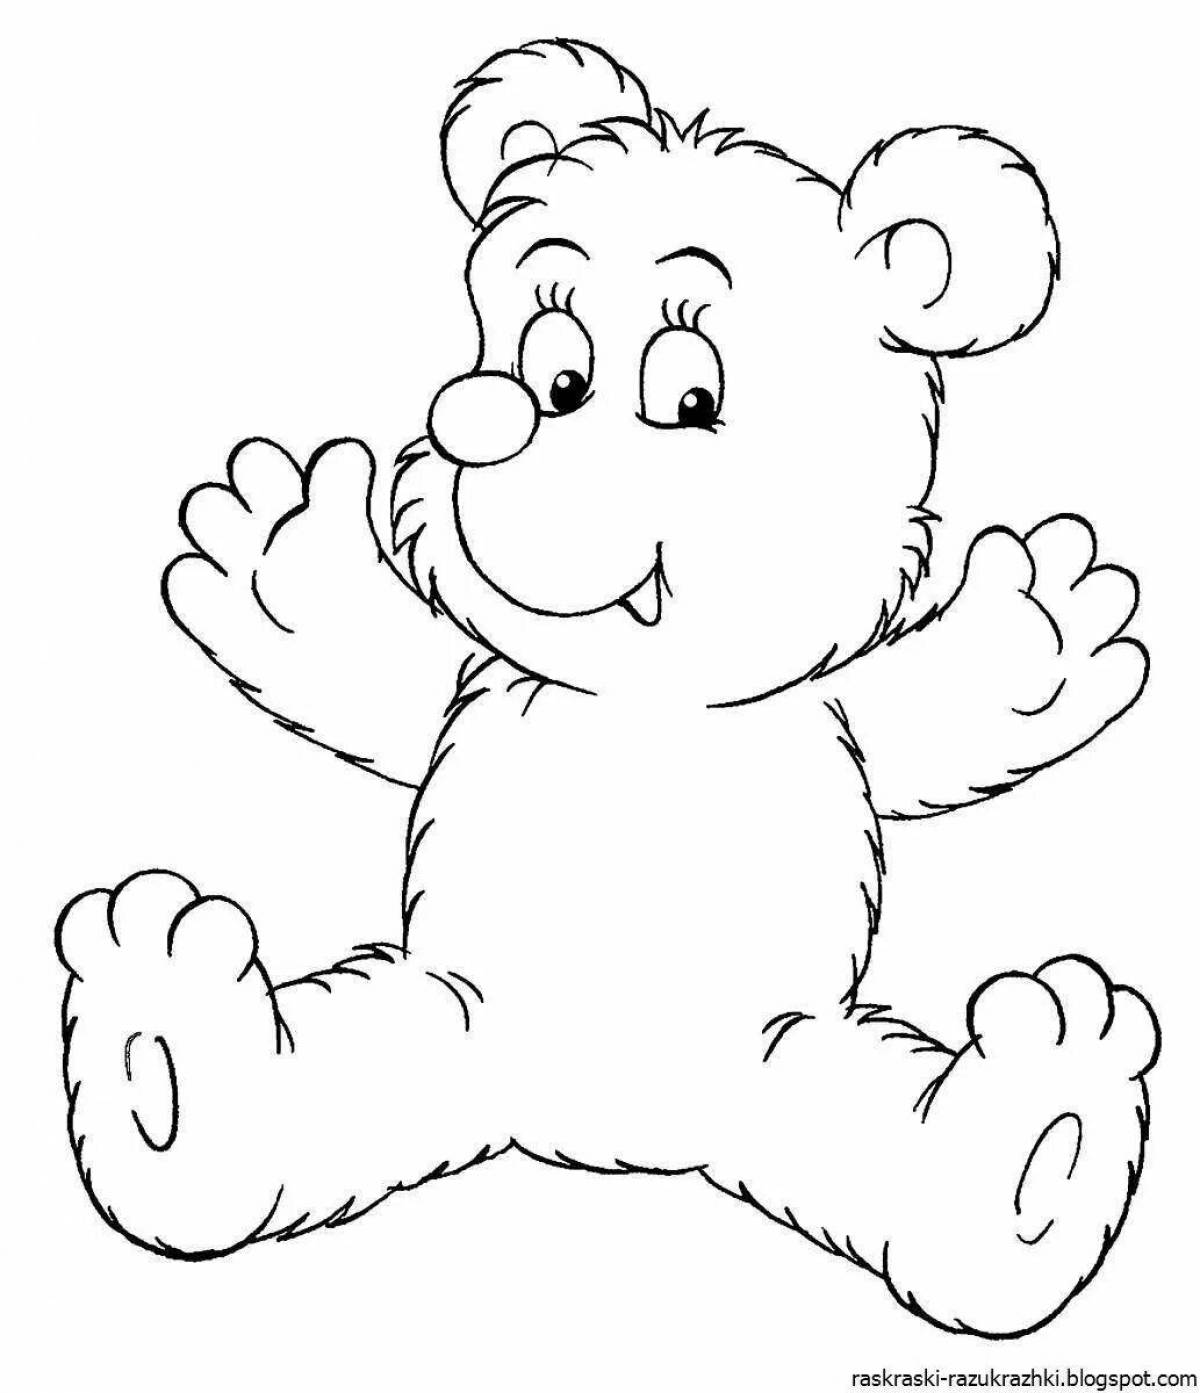 Animated bear coloring book for 2-3 year olds